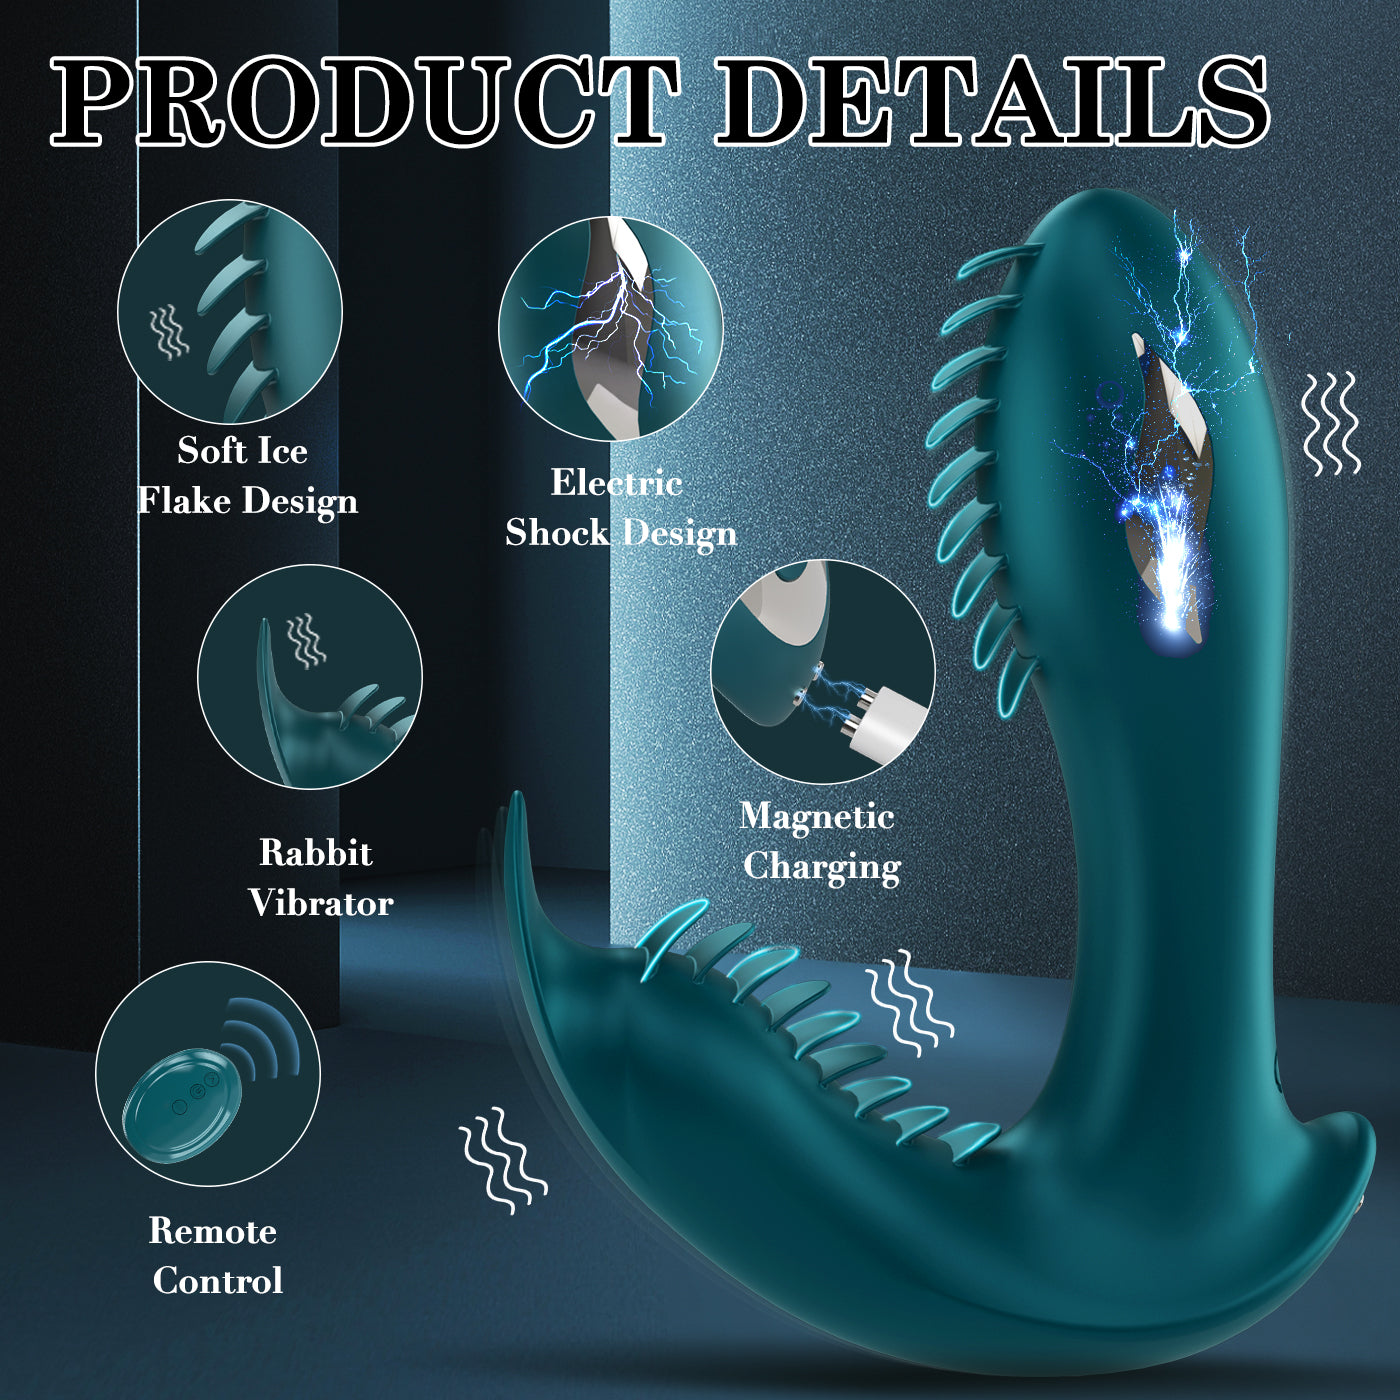 Anal Vibrator with Remote Control,Areskey Vibrating Butt Plug with 7 Vibration & 7 Electric Shock Modes, G Spot Clitoral Stimulation Adult Sex Toy for Men, Women, Couple